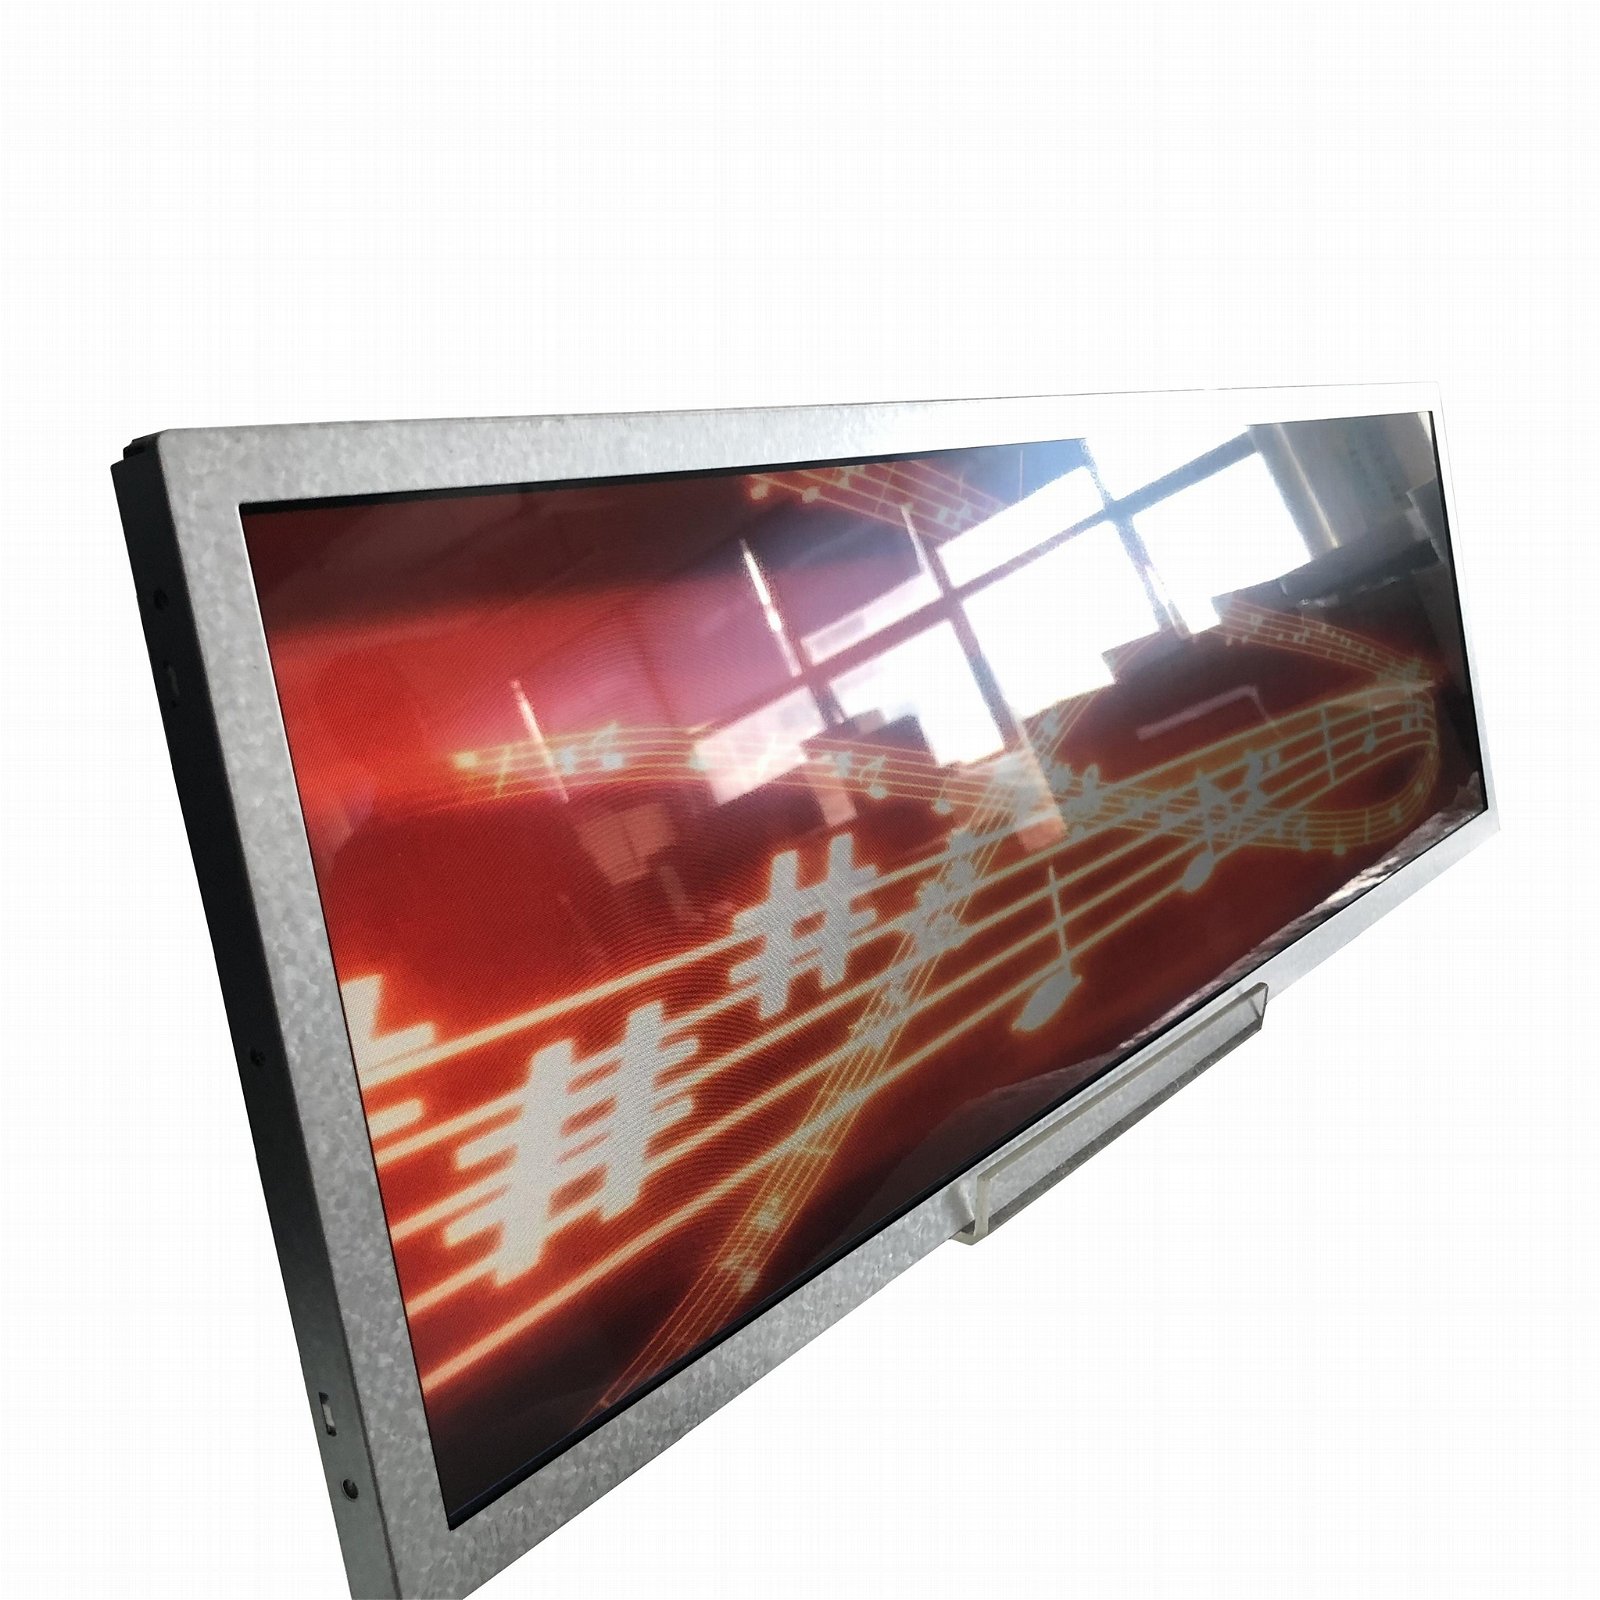 best price bar screen 1000 nit lcd monitor G286HAN01.0 AUO 29 inch display outdo 2